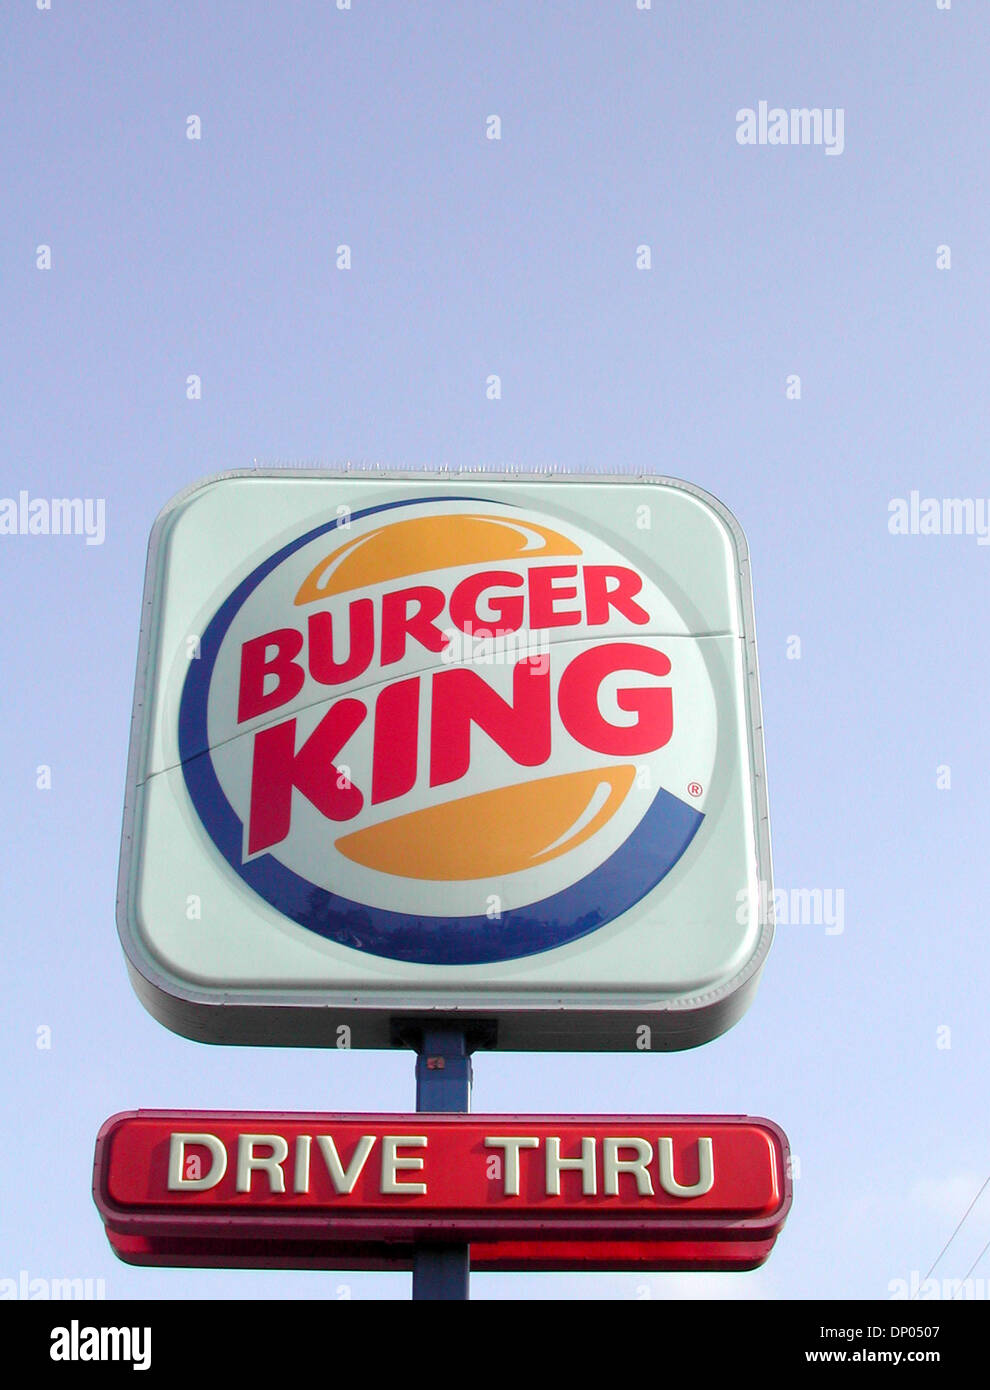 Sep 02, 2010 - Los Angeles, CA, USA - Burger King is being sold to private equity firm 3G Capital in a deal valued at $3.26bn (£2.1bn), it has been announced. The fast food chain, with 12,100 outlets worldwide, had been the subject of takeover rumours for days. Burger King floated on Wall Street in 2006, four years after being bought by a group of private equity firm. Pictured: Bur Stock Photo